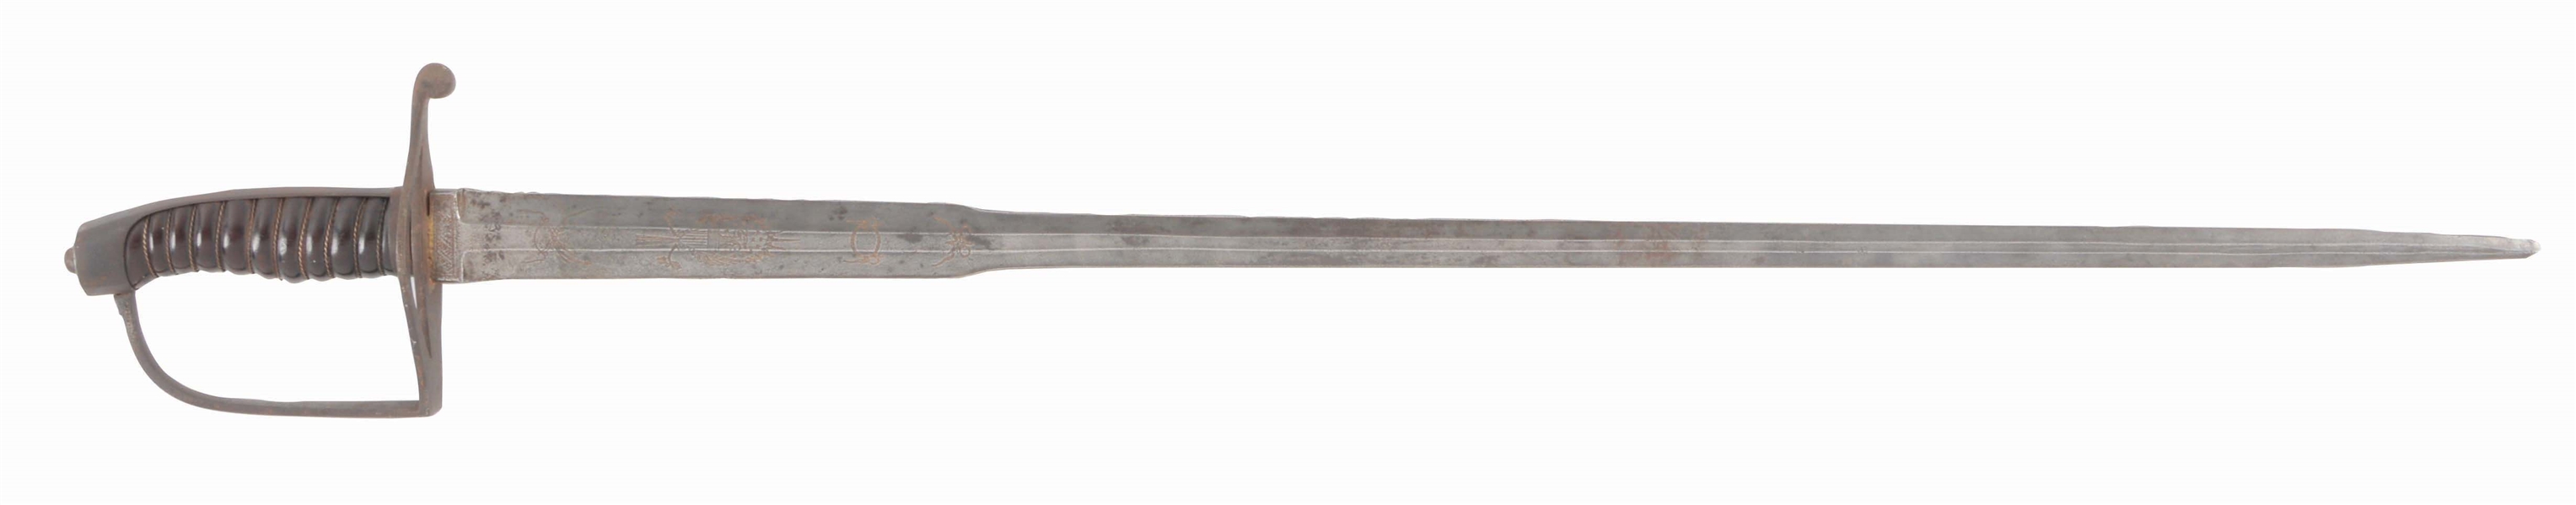 EXTREMELY RARE "ROSE" MARKED NON-COMMISSIONED OFFICERS SWORD.